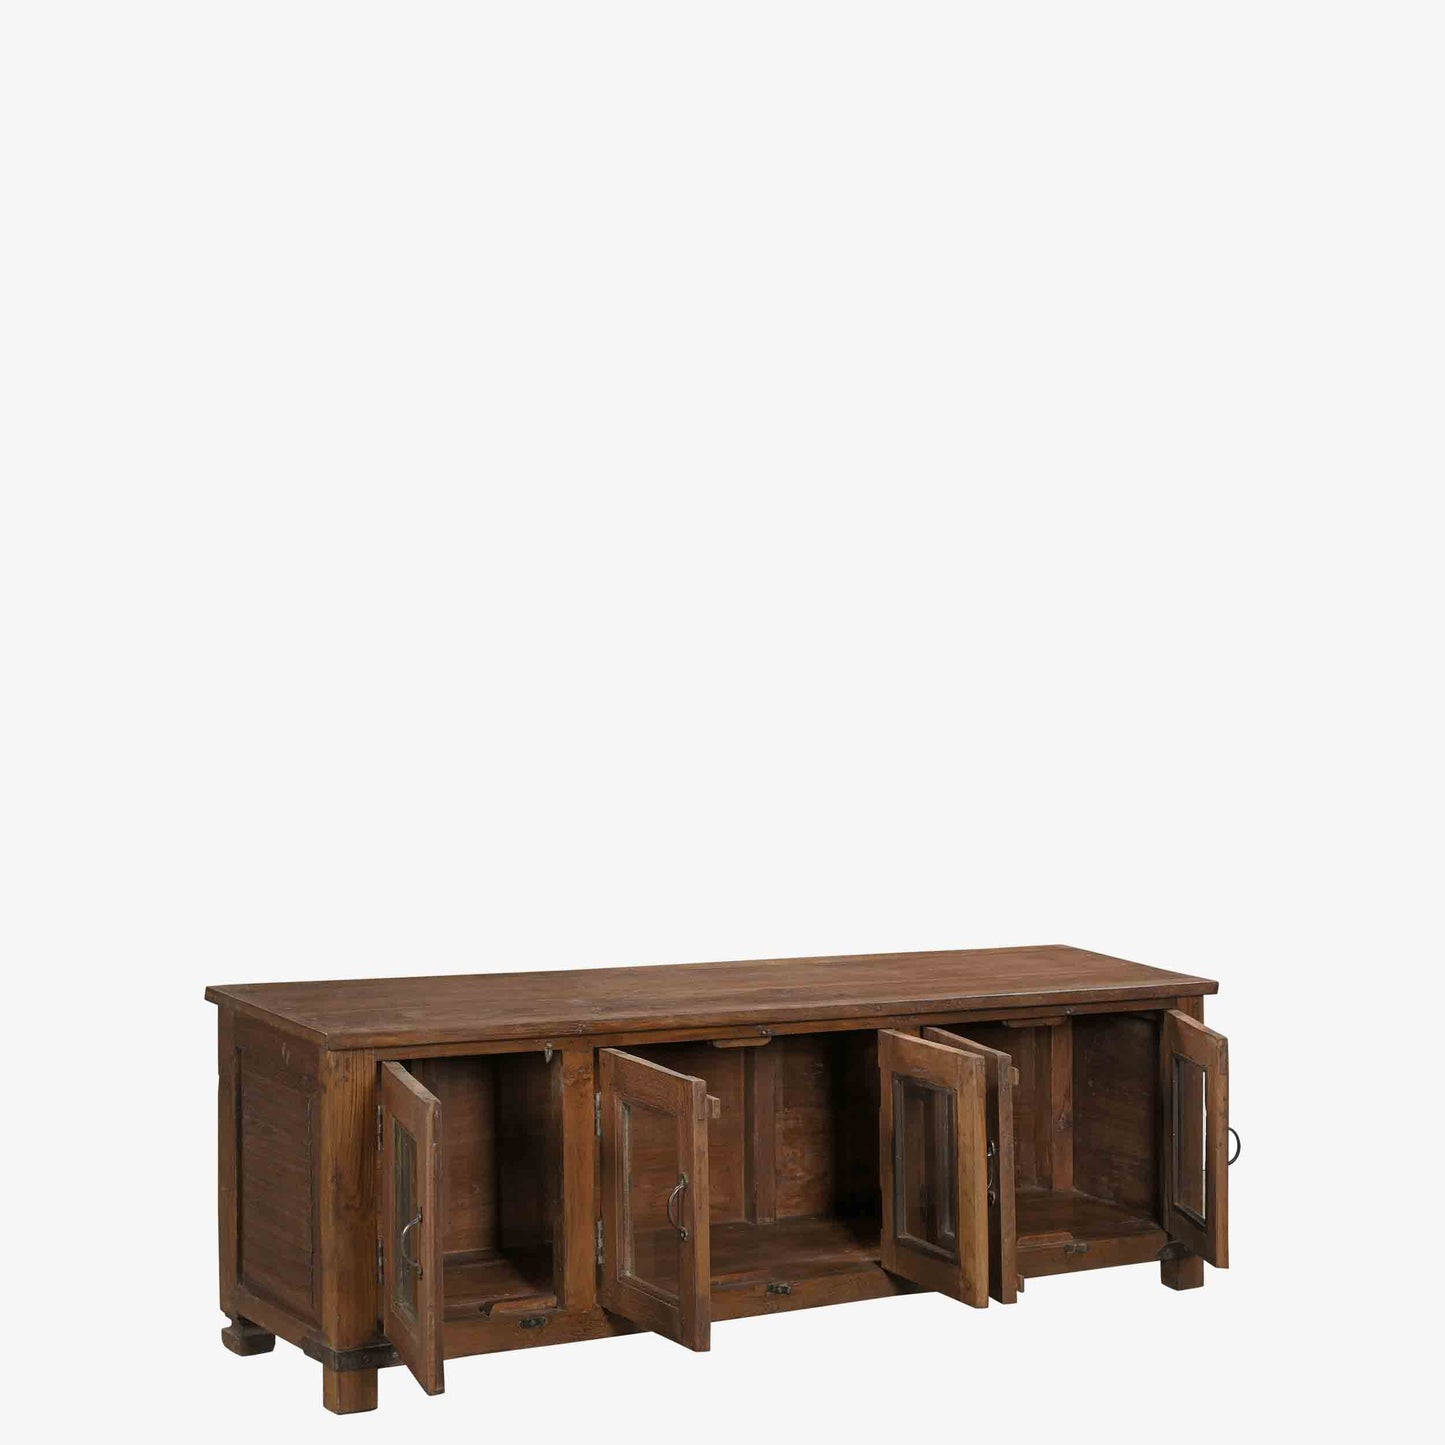 The May Antique Display Sideboard